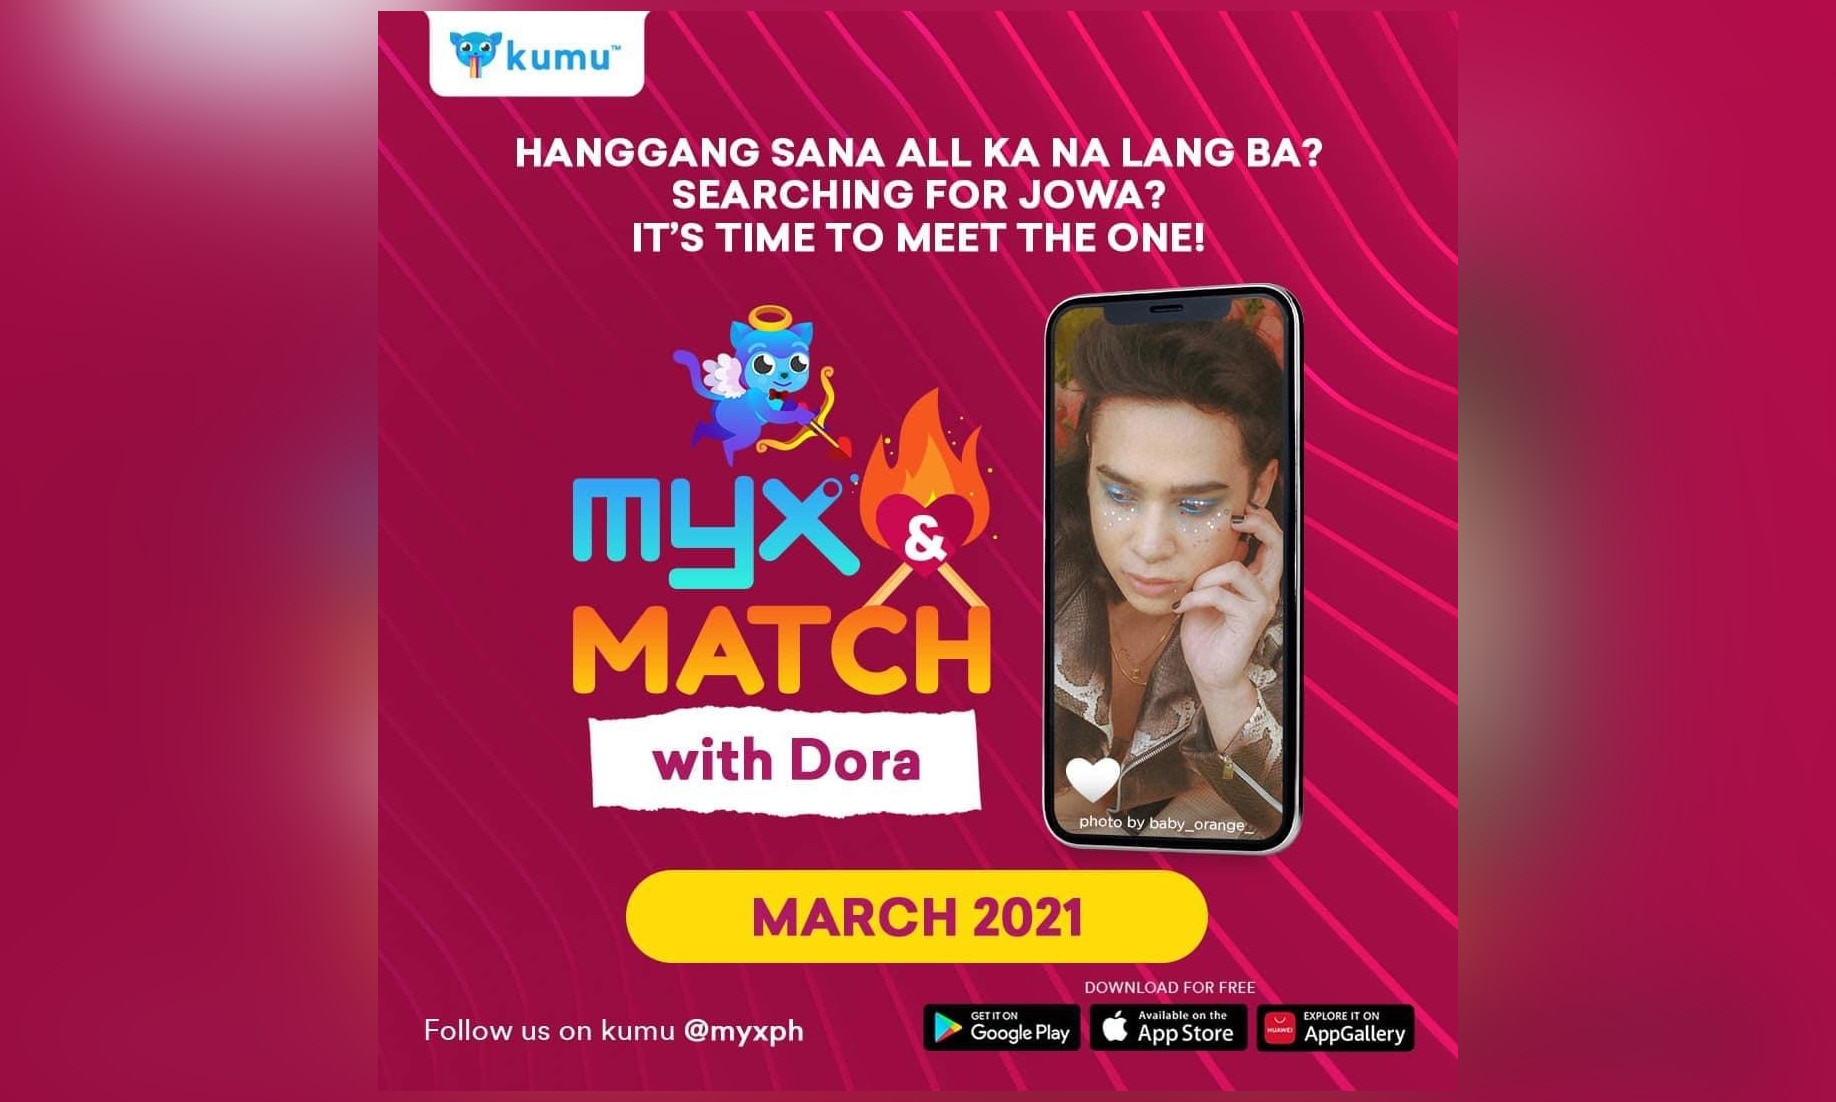 New virtual dating game show "MYX and Match" launching this March on kumu